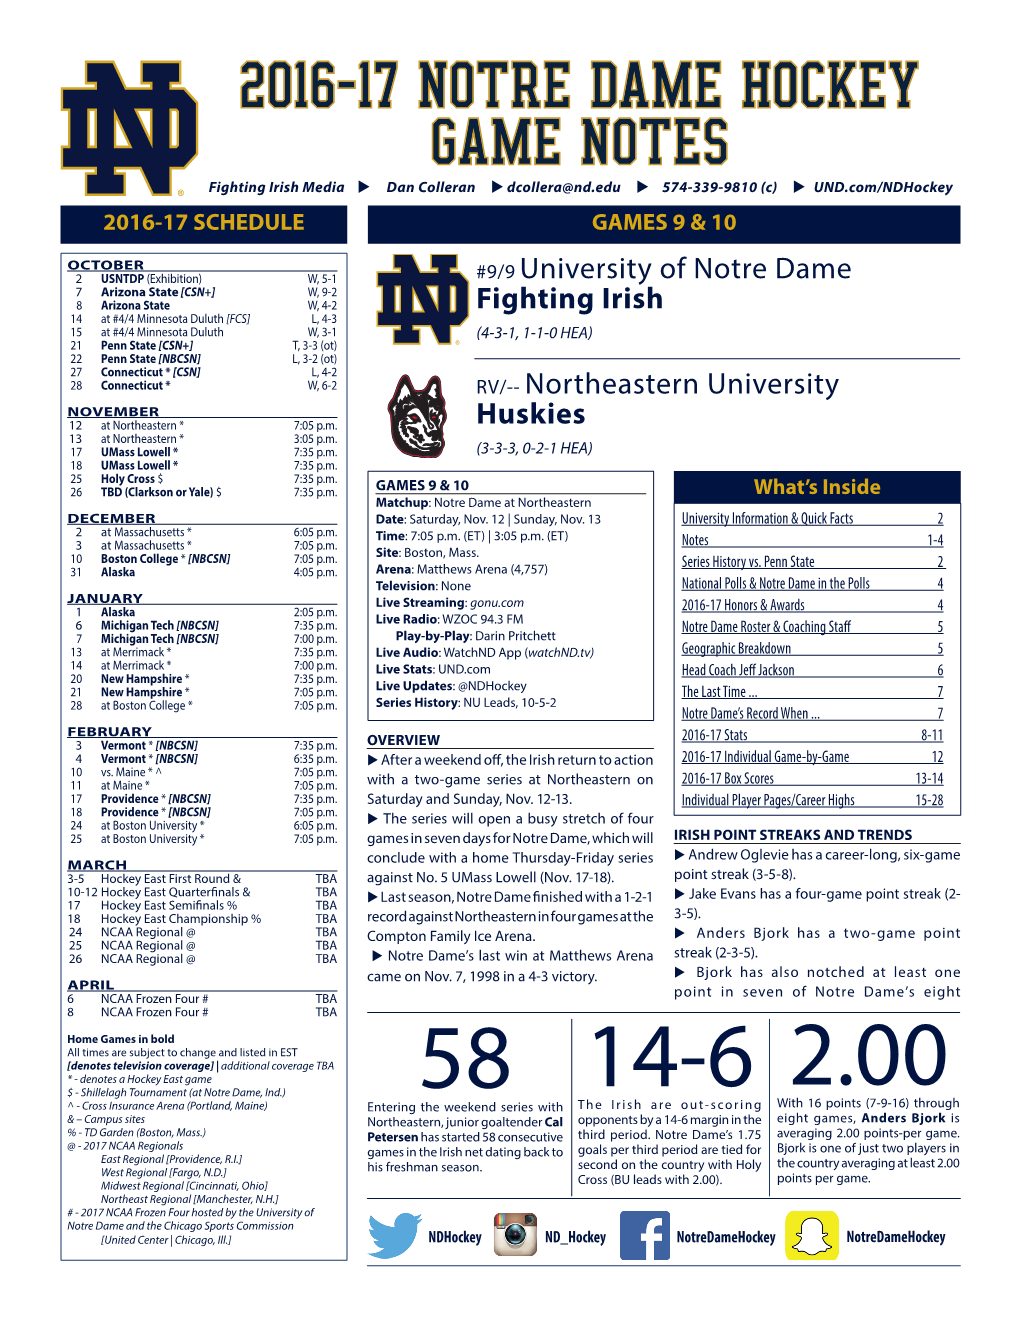 2016-17 Notre Dame Hockey Game Notes 2016-17 Notre